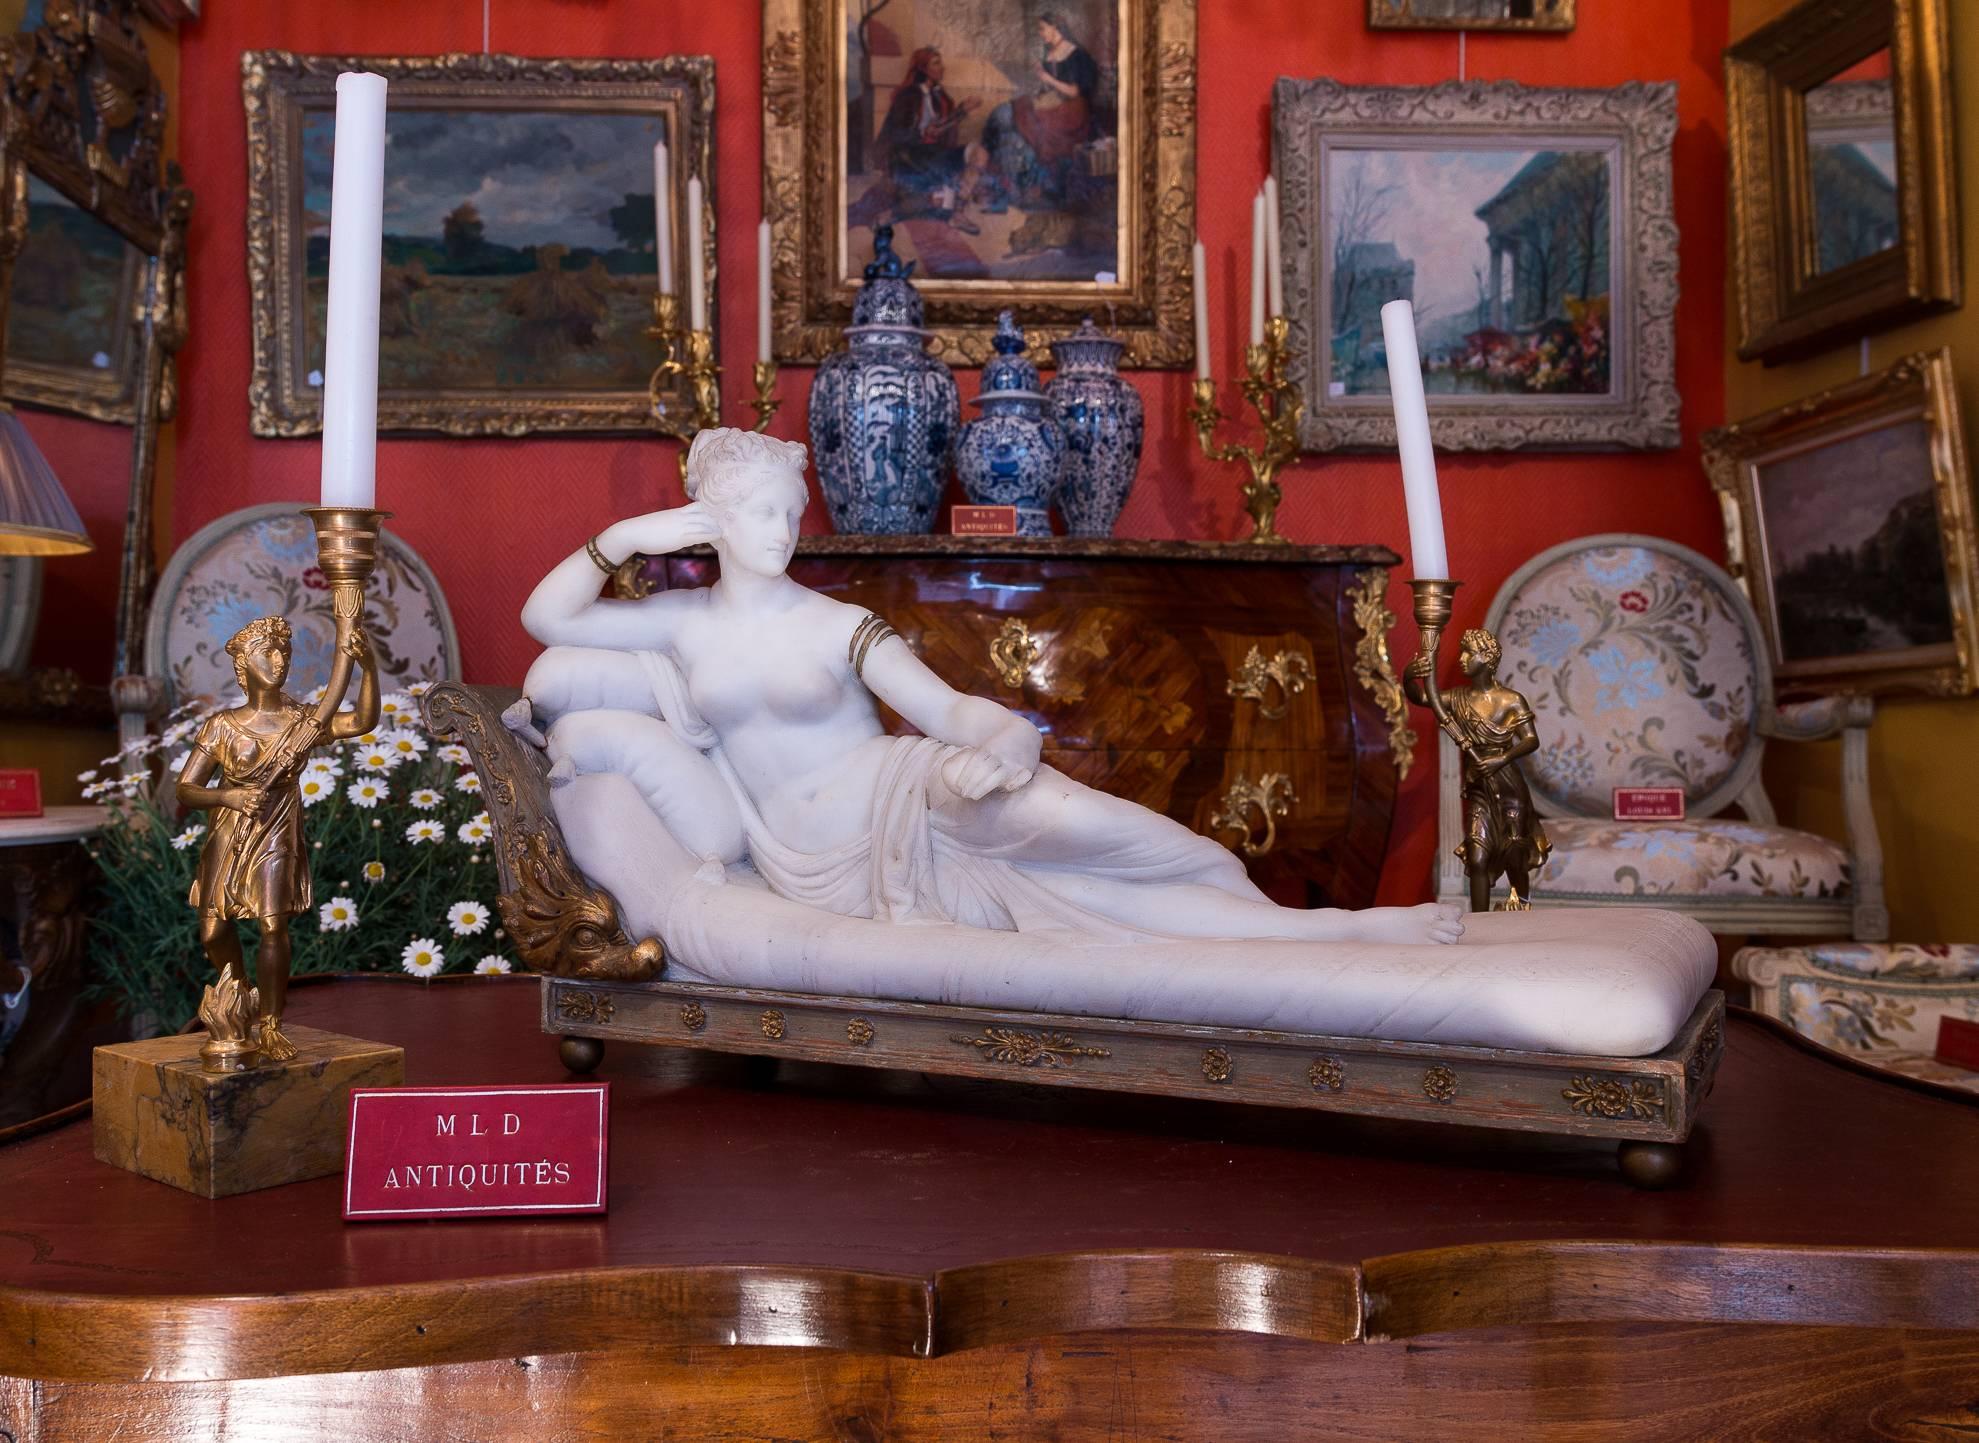 We are pleased to present you, a beautiful white-Carrara marble sculpture in the manner of Antonio Canova, depicting Pauline Bonaparte Borghese in Venus Vitrix.
Excellent quality in our sculpture not signed, indeed mid-19th-century Italian work,